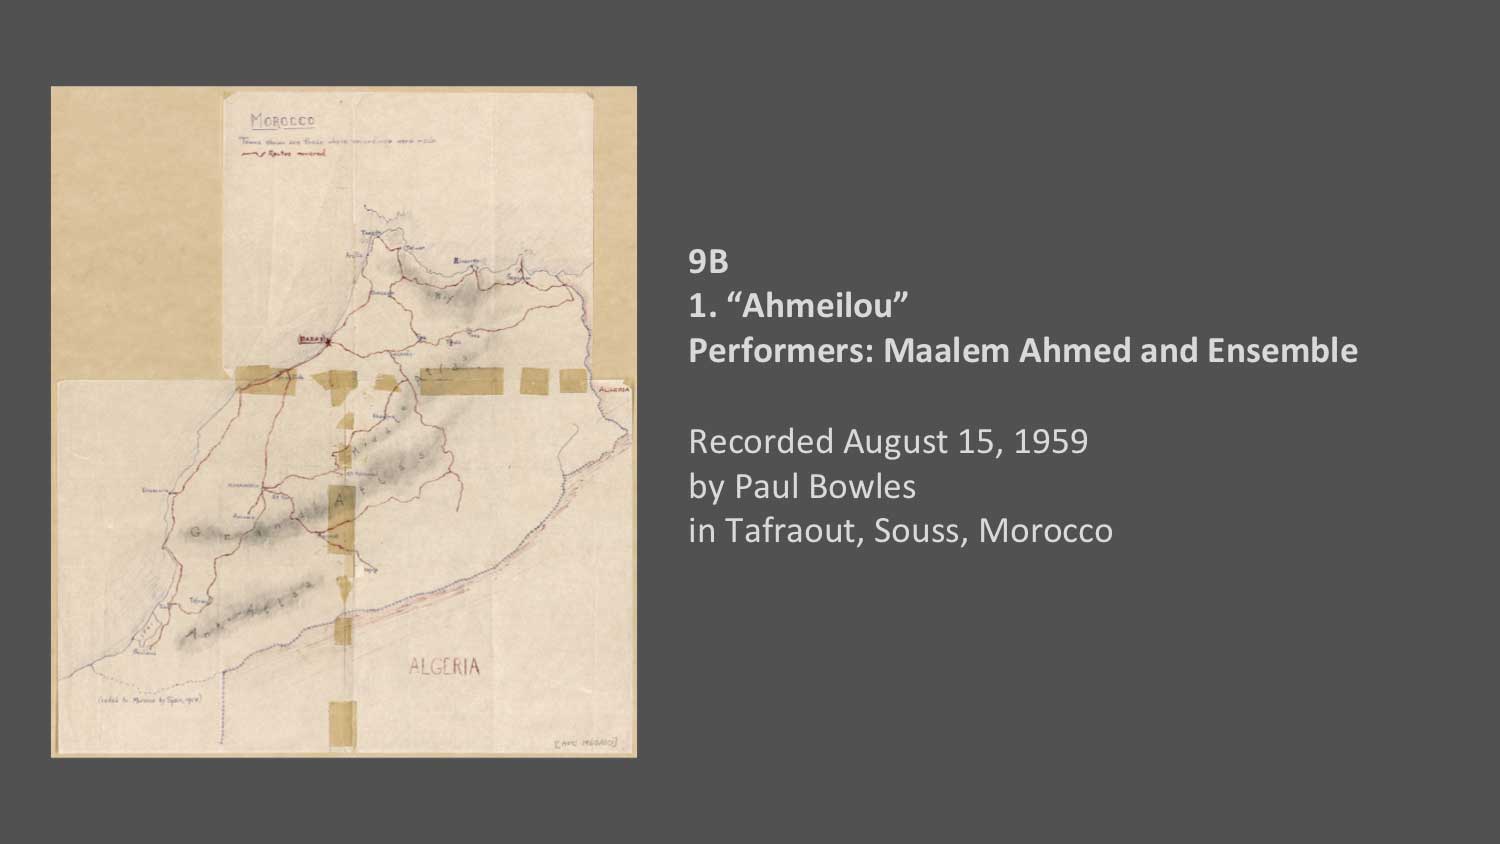 9B
1. “Ahmeilou” Performers: Maalem Ahmed and Ensemble 
Recorded by Paul Bowles on August 15, 1959 in Tafraout, Souss, Morocco